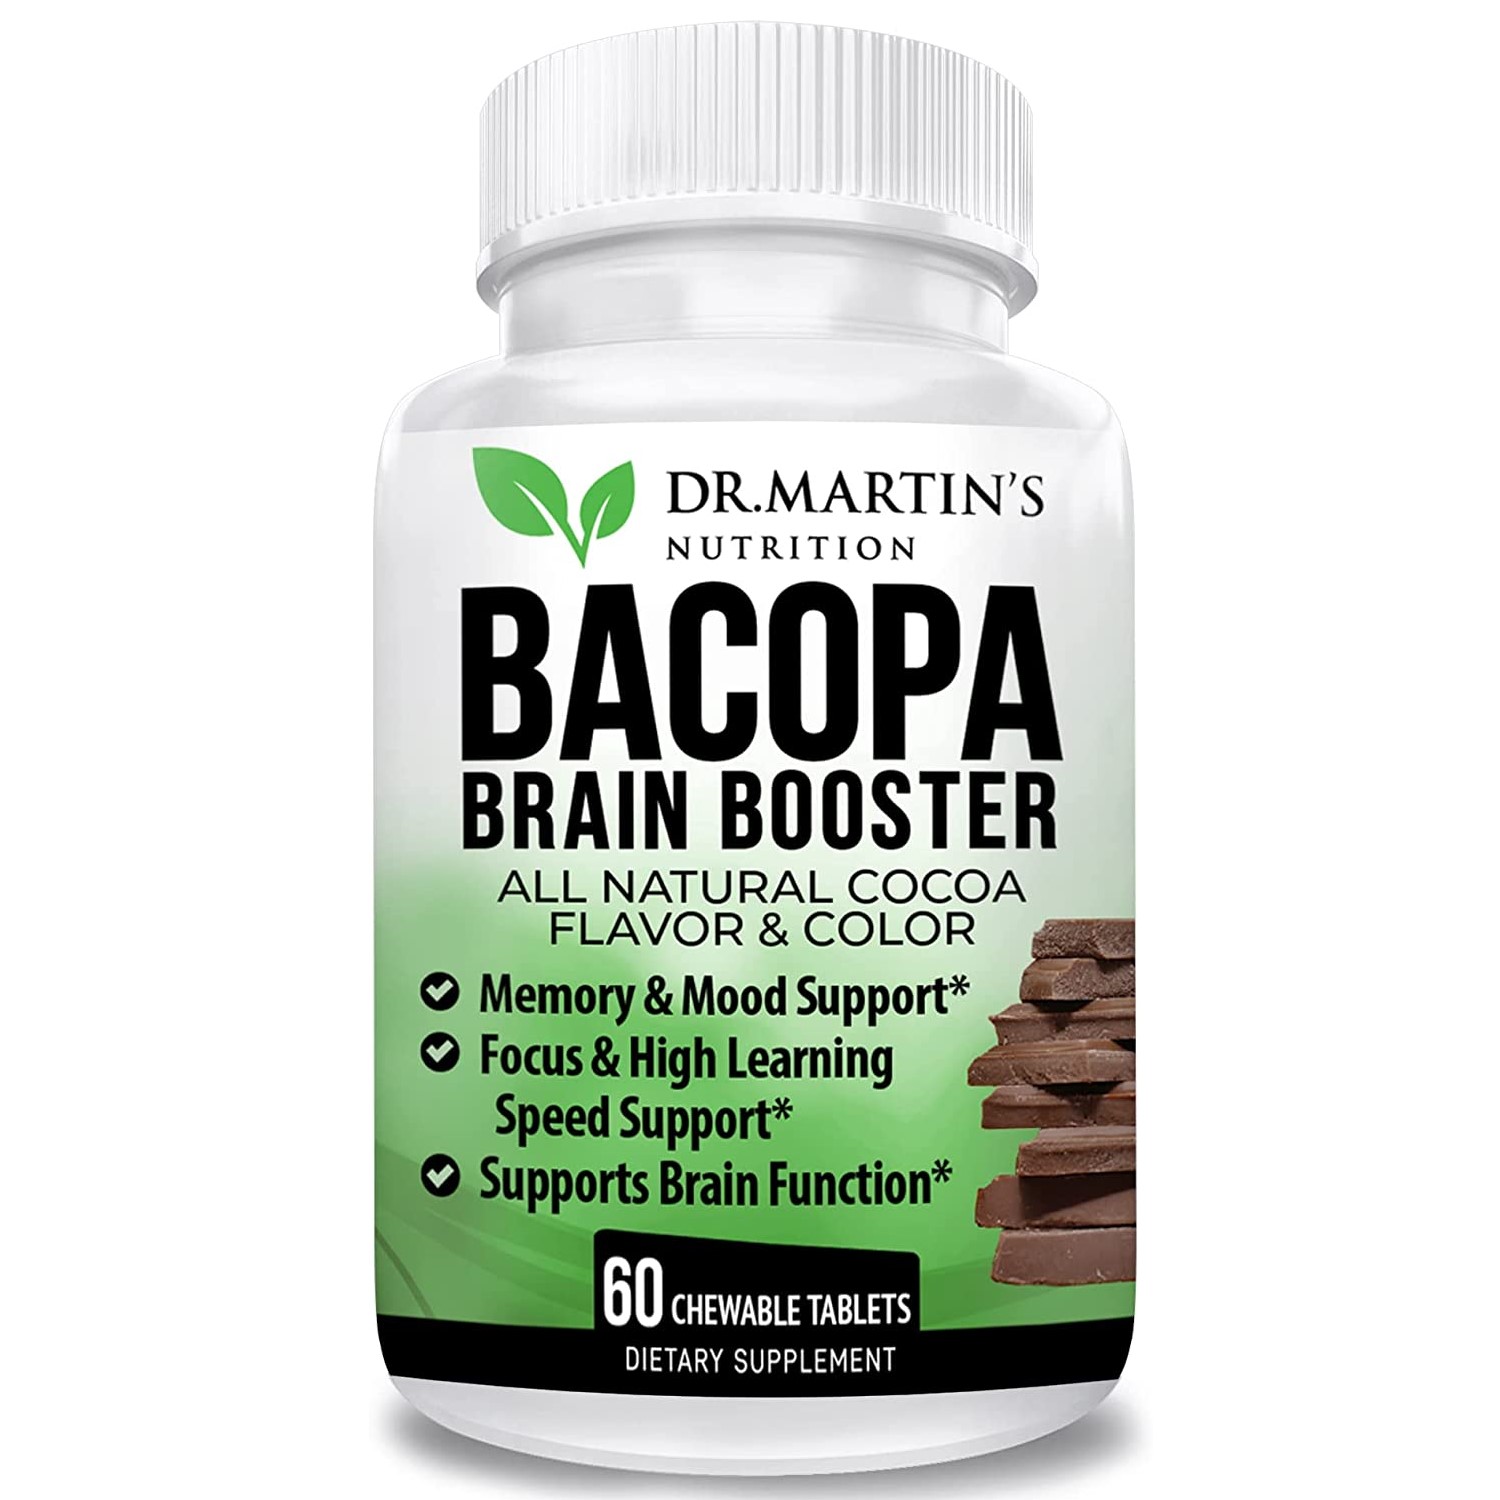 Dr Martin’s Nutrition Bacopa Brain Booster